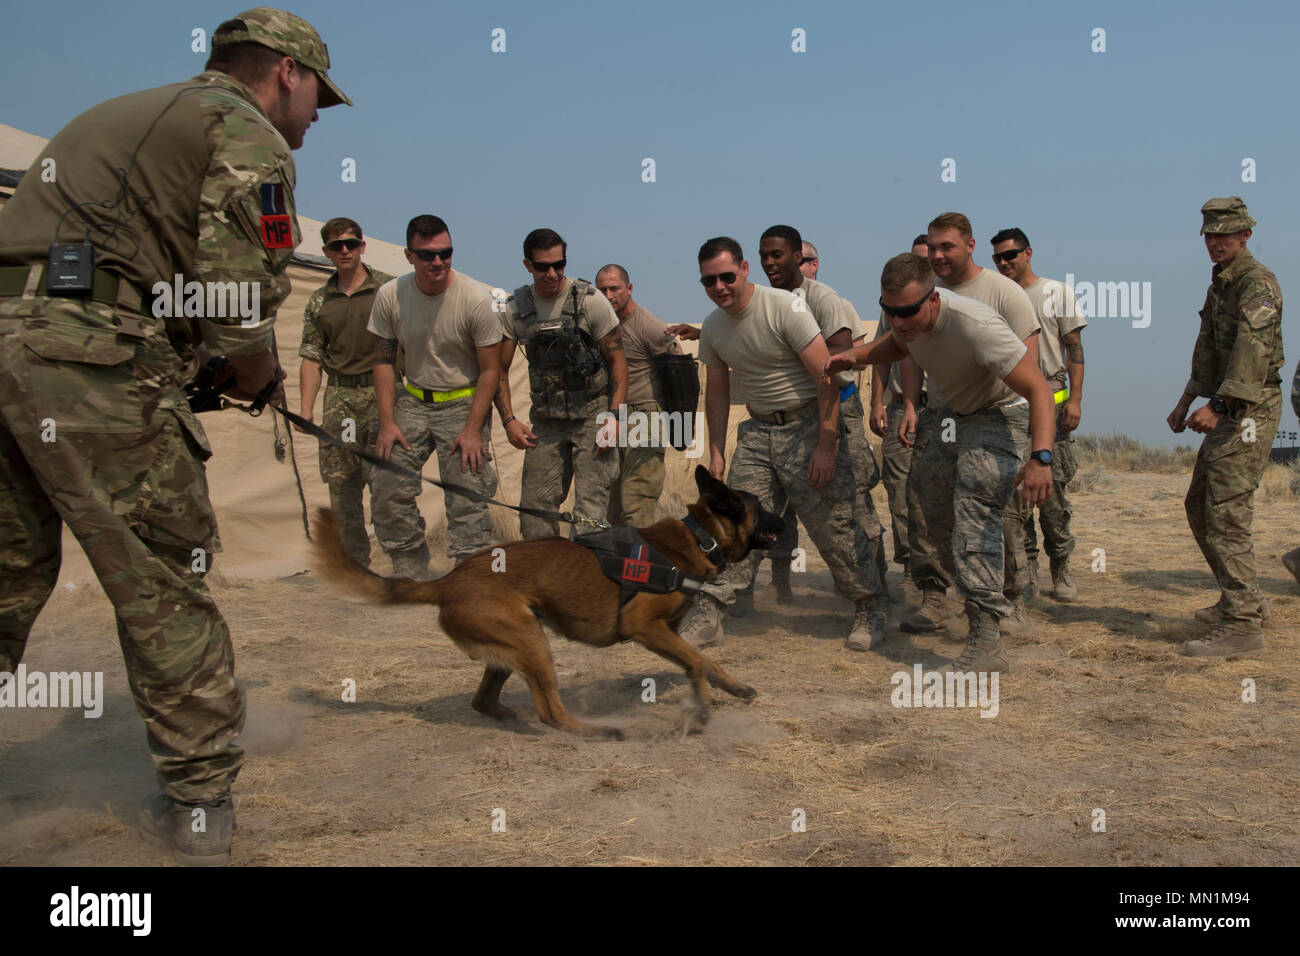 U.K. Royal Air Force Cpl. Mathew Hoskinson, dog handler, RAF Henlow demonstrates various military working dog training scenarios to U.S. Air Force service members at Grant County International Airport, Wash., Aug. 7, 2017, in support of exercise Mobility Guardian. More than 3,000 Airmen, Soldiers, Sailors, Marines and international partners converged on the state of Washington in support of Mobility Guardian. The exercise is intended to test the abilities of the Mobility Air Forces to execute rapid global mobility missions in dynamic, contested environments. Mobility Guardian is Air Mobility C Stock Photo